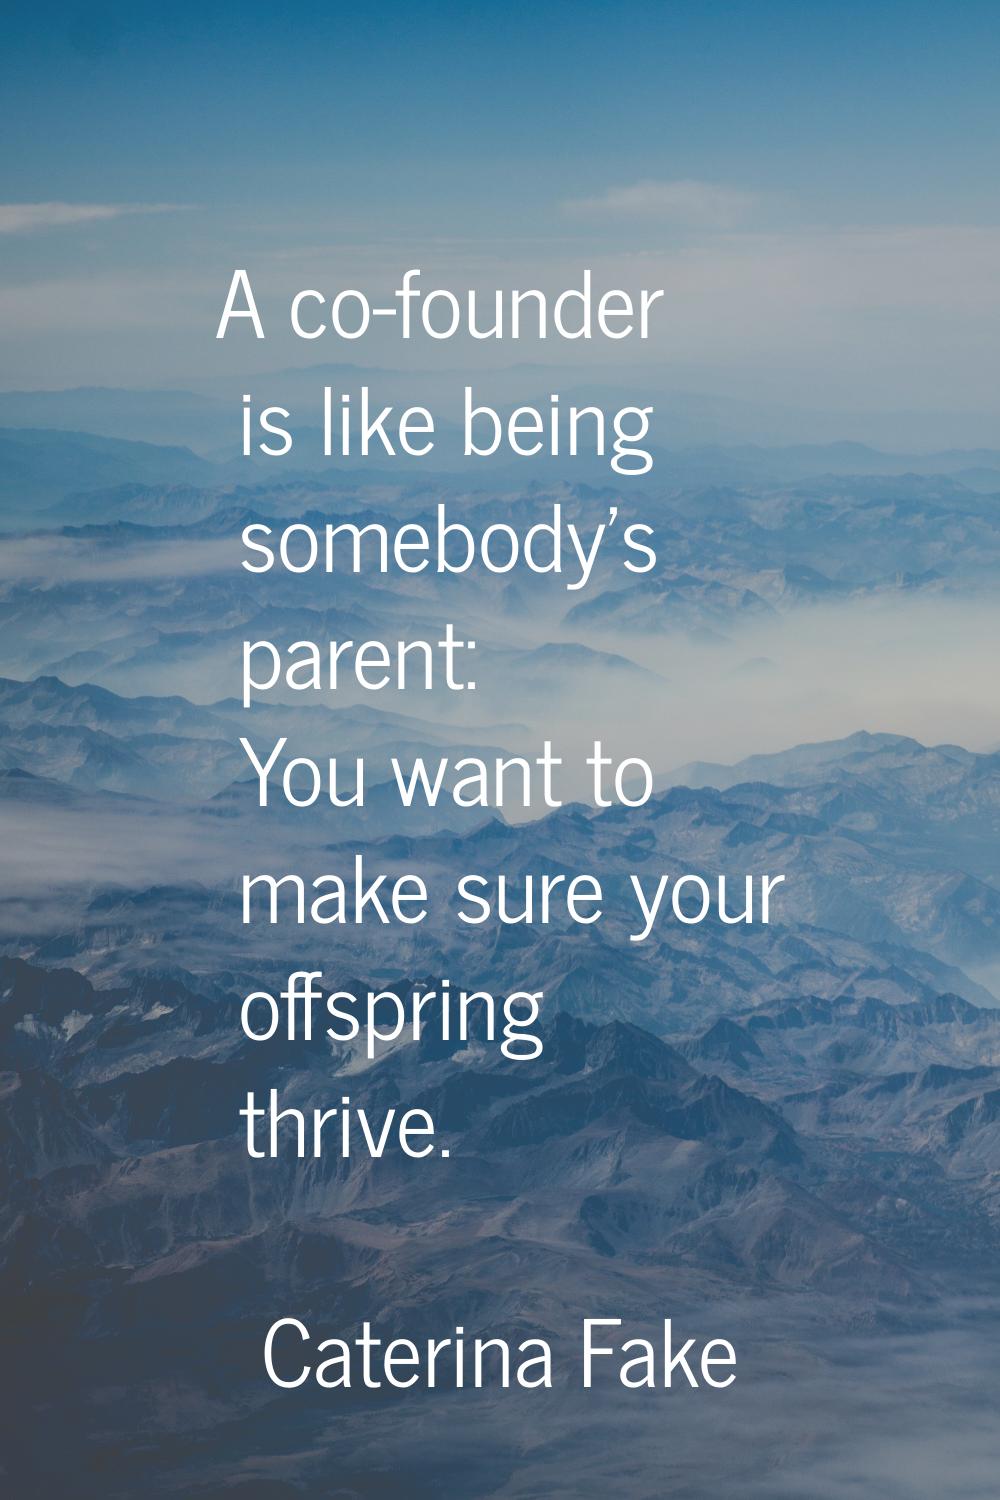 A co-founder is like being somebody's parent: You want to make sure your offspring thrive.